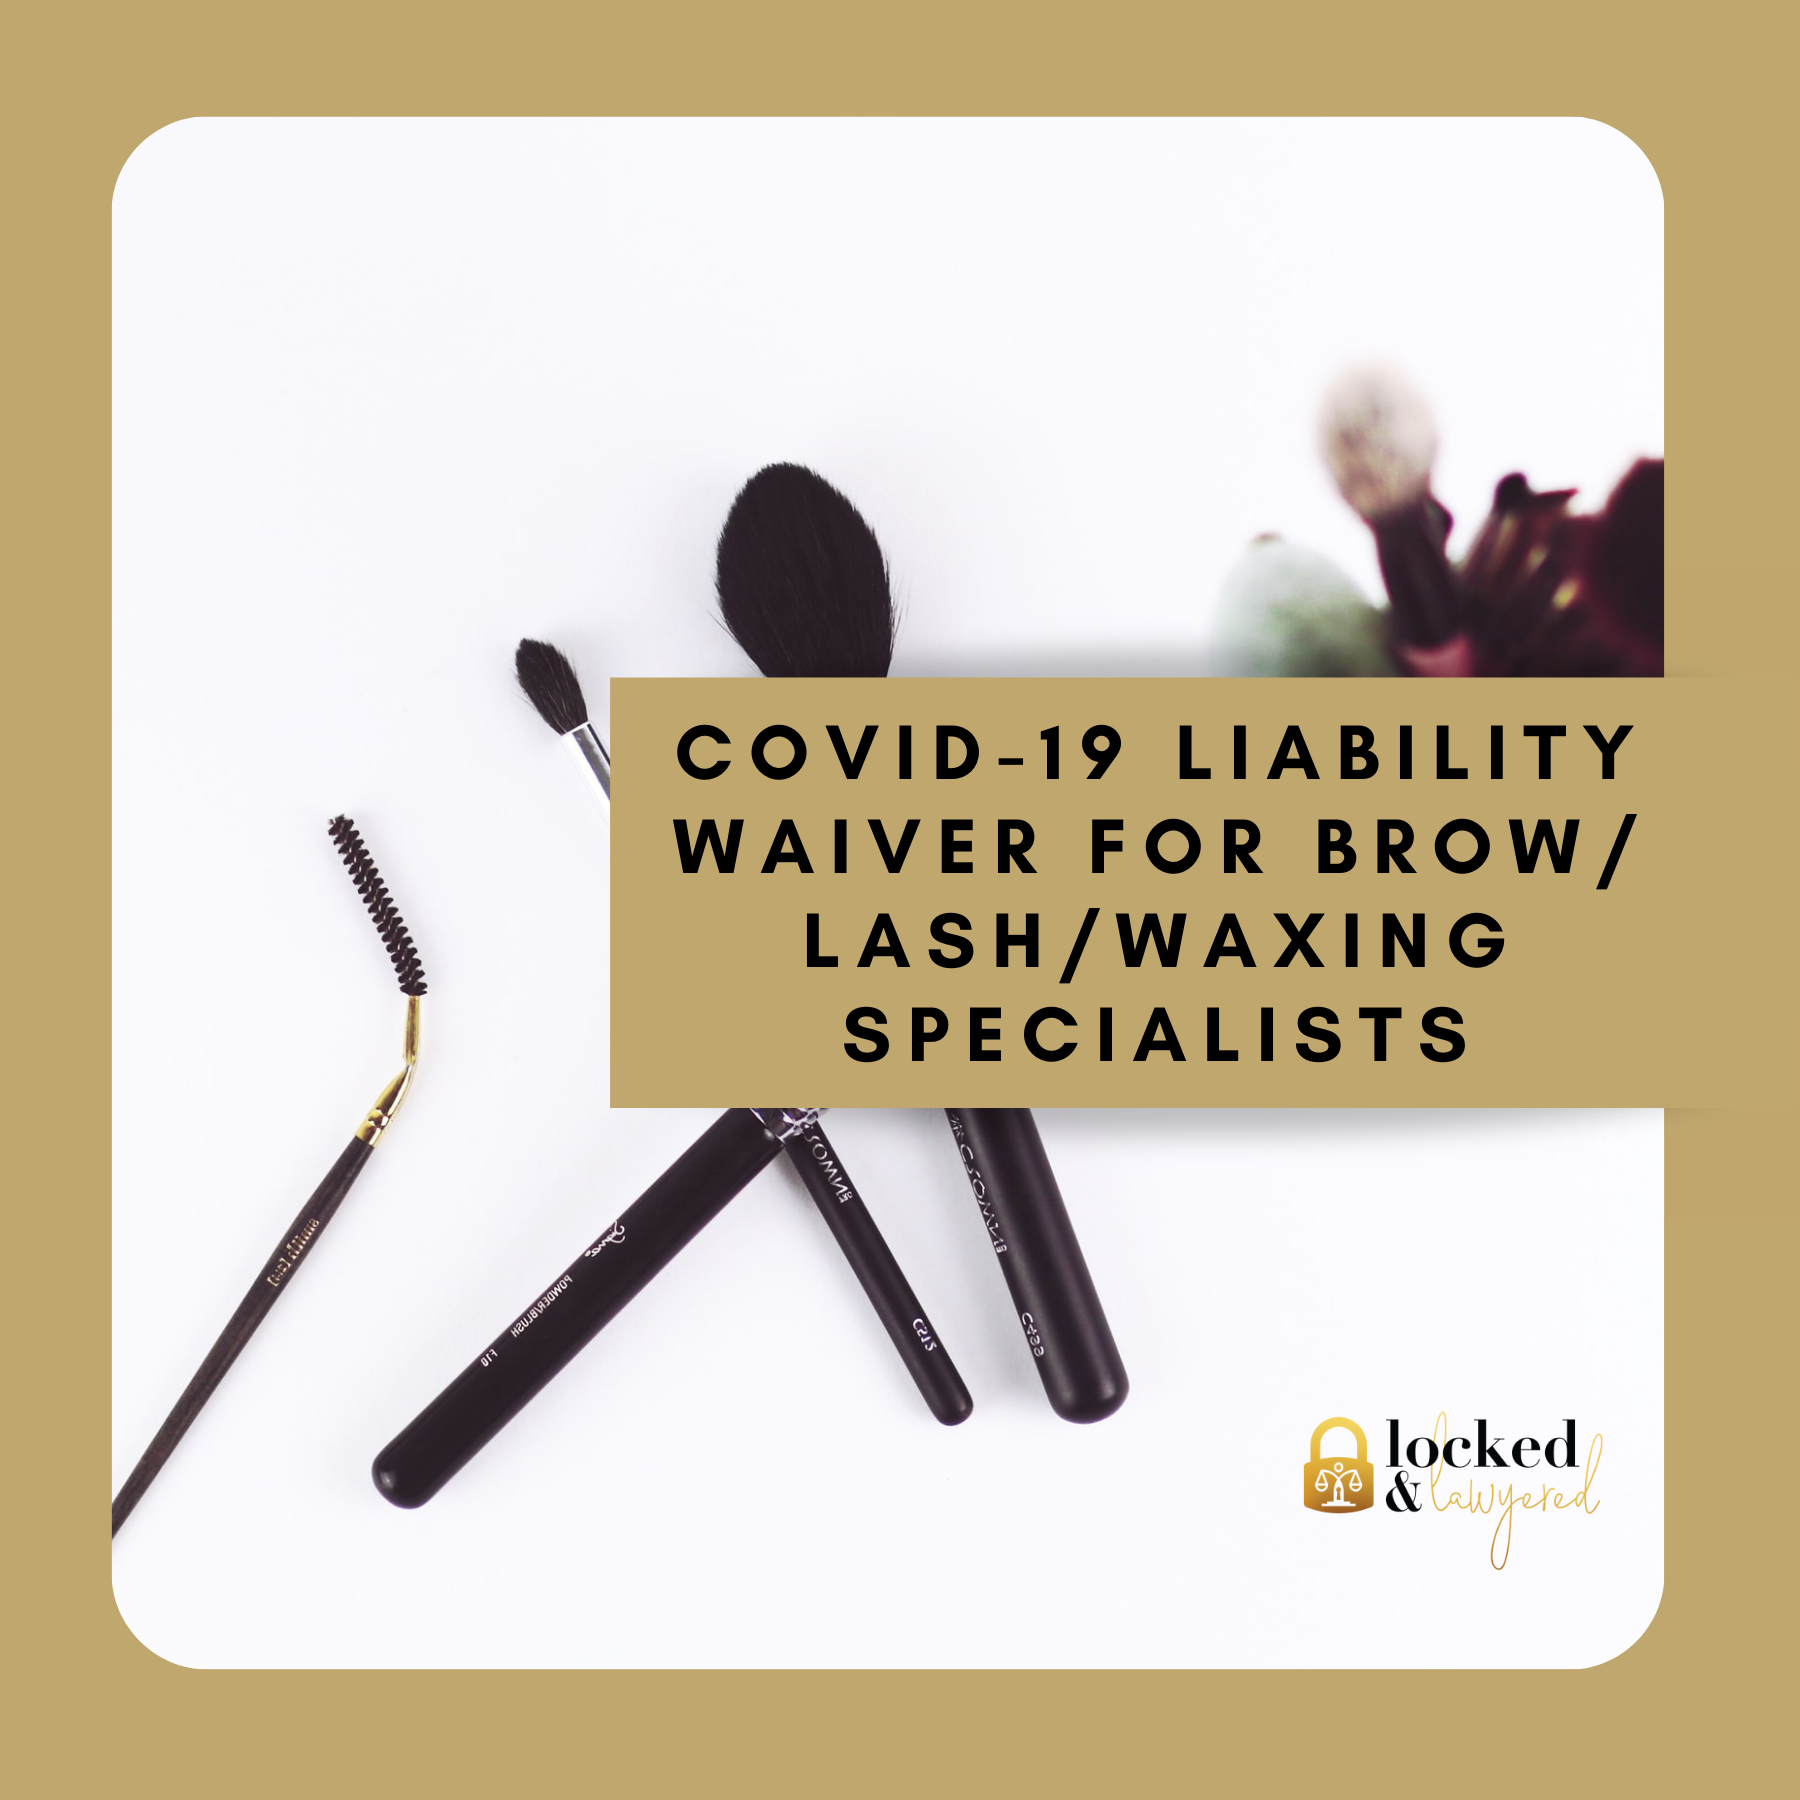 COVID-19 Liability Waiver for Brow/Lash/Waxing Specialists